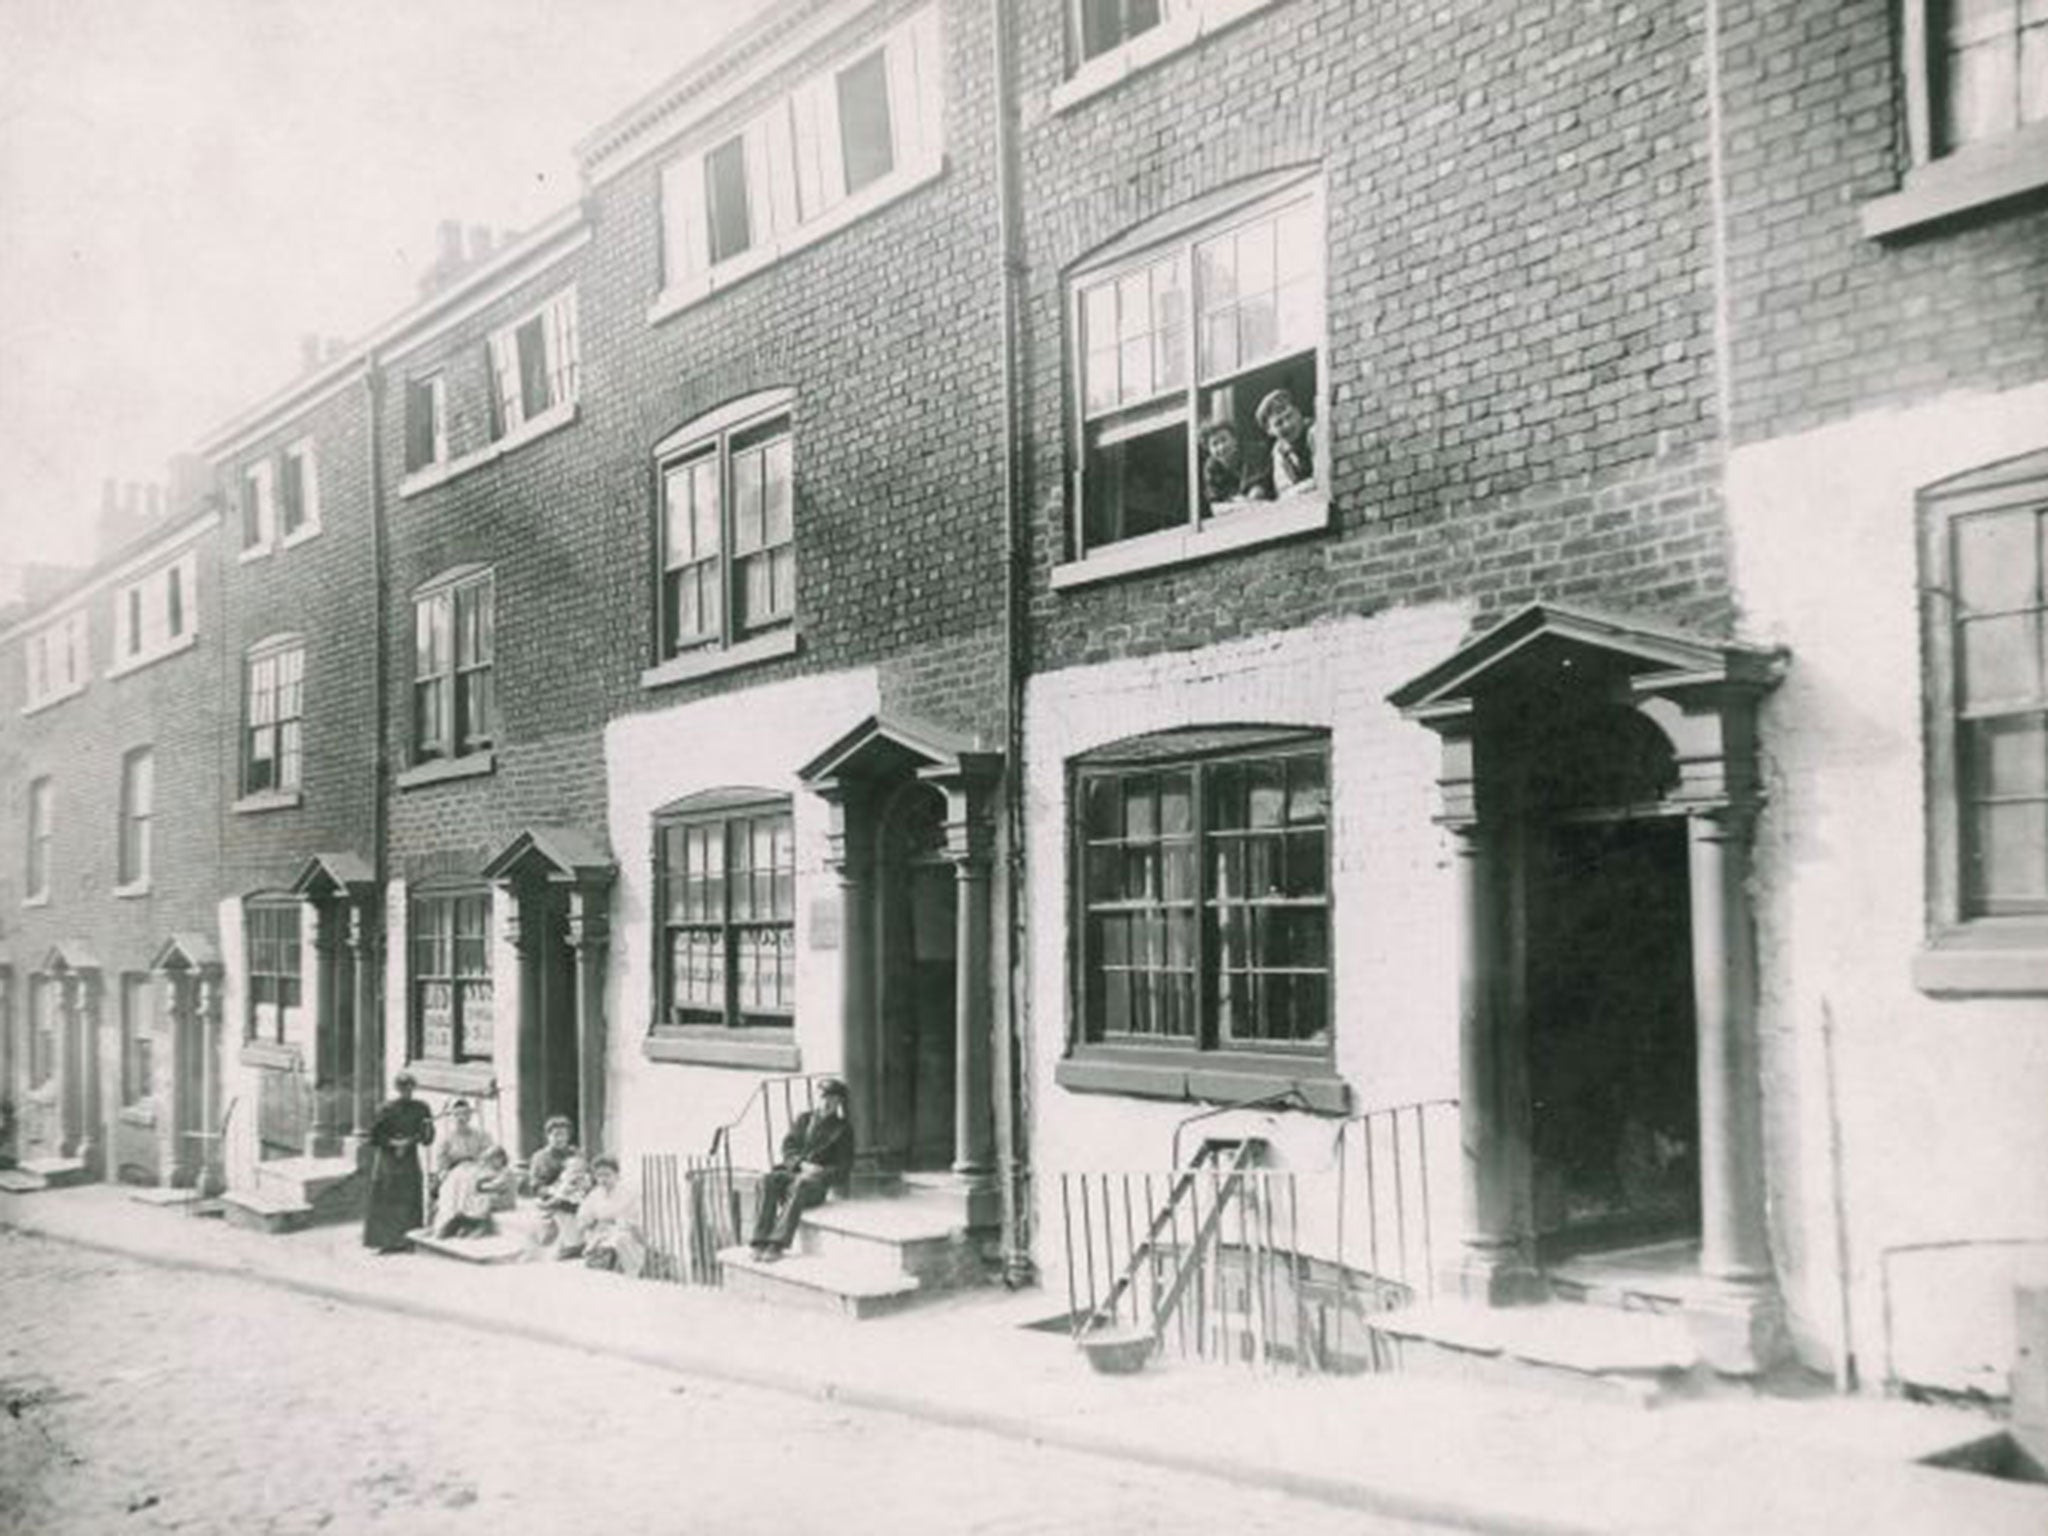 It was estimated that only a quarter of the houses in Charter Street, where William Kirby lived, were free of vice